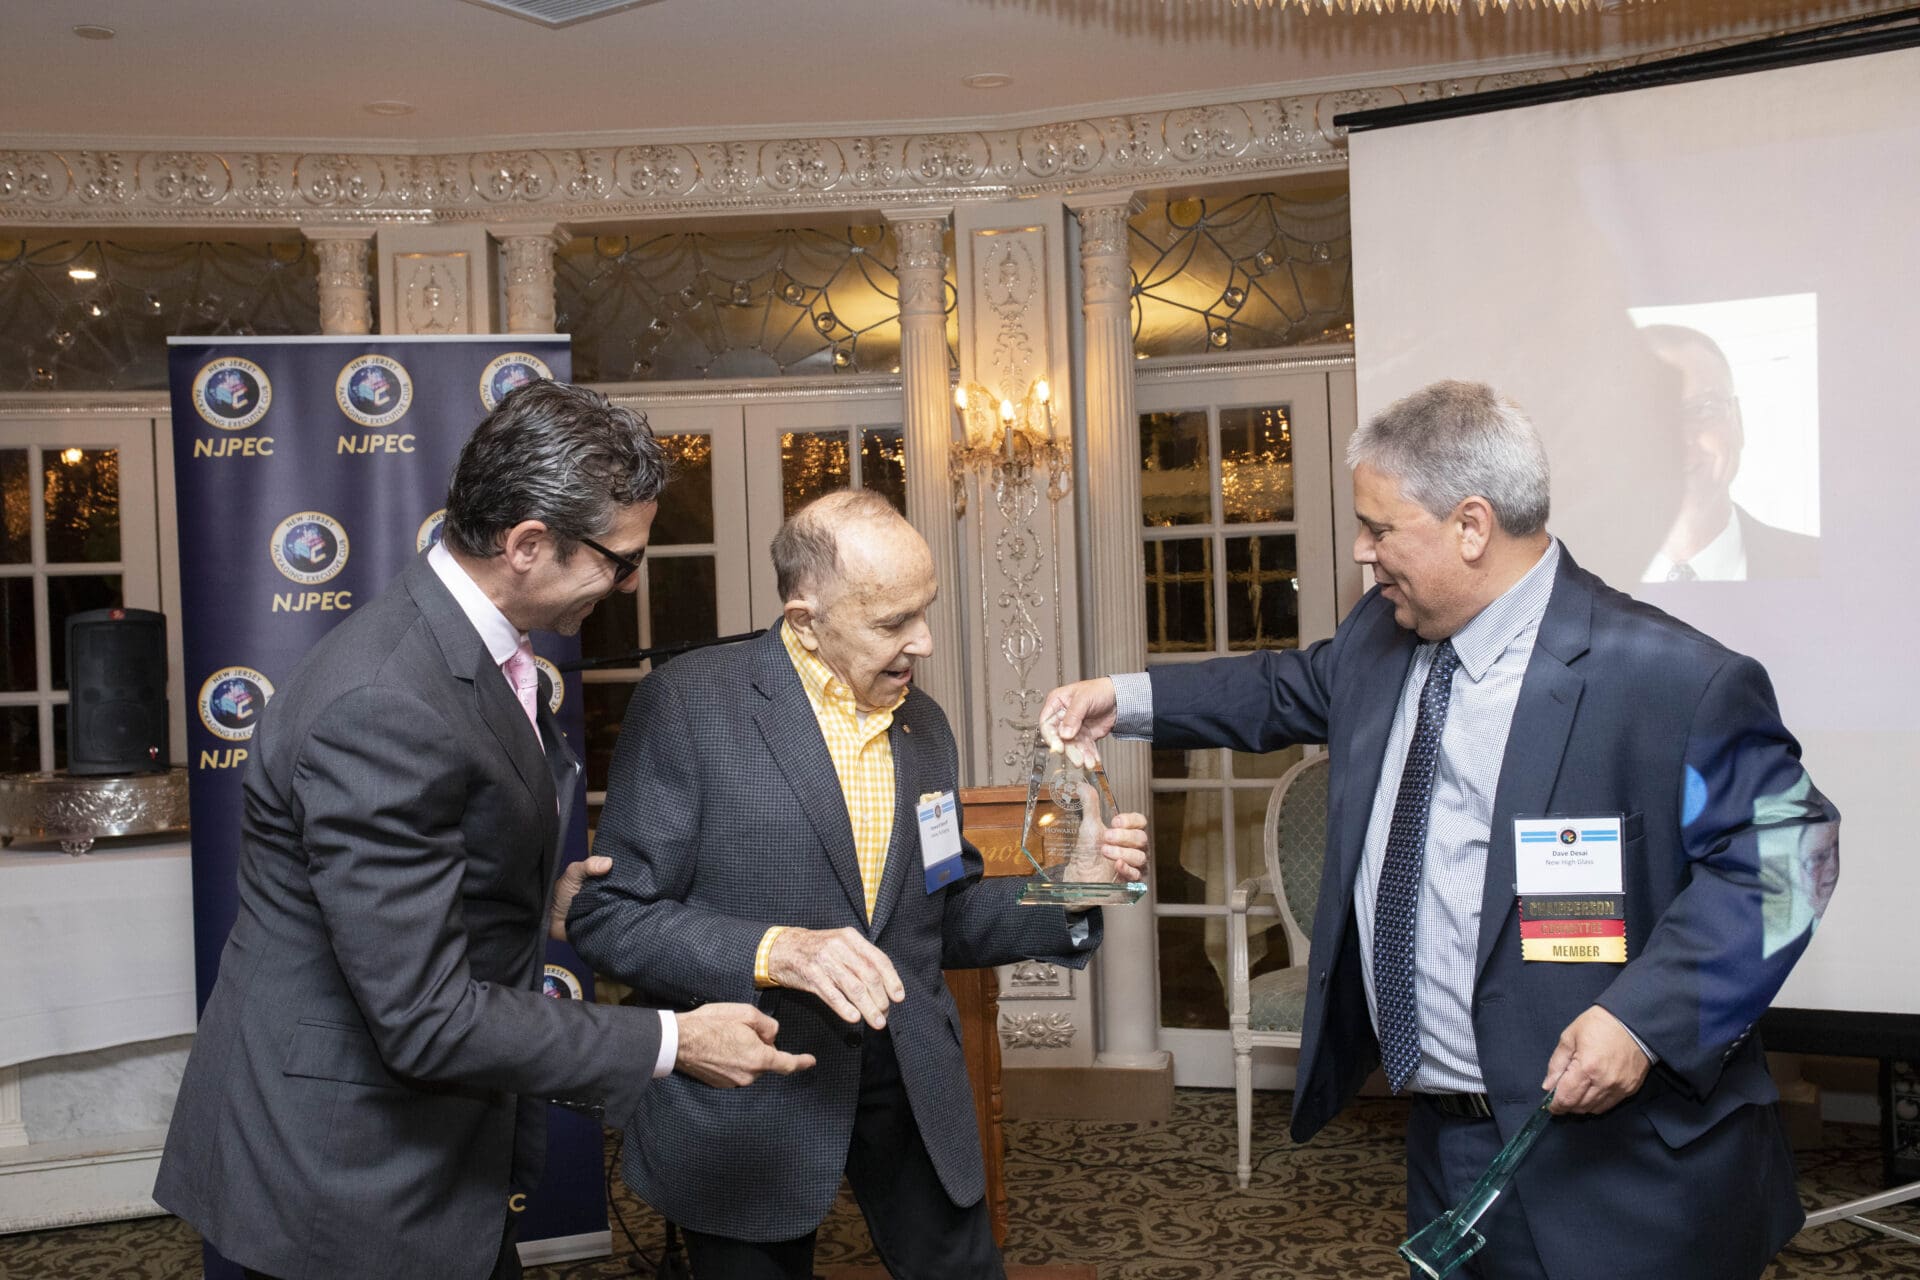 A man in a suit is handing an award to a man in a suit.